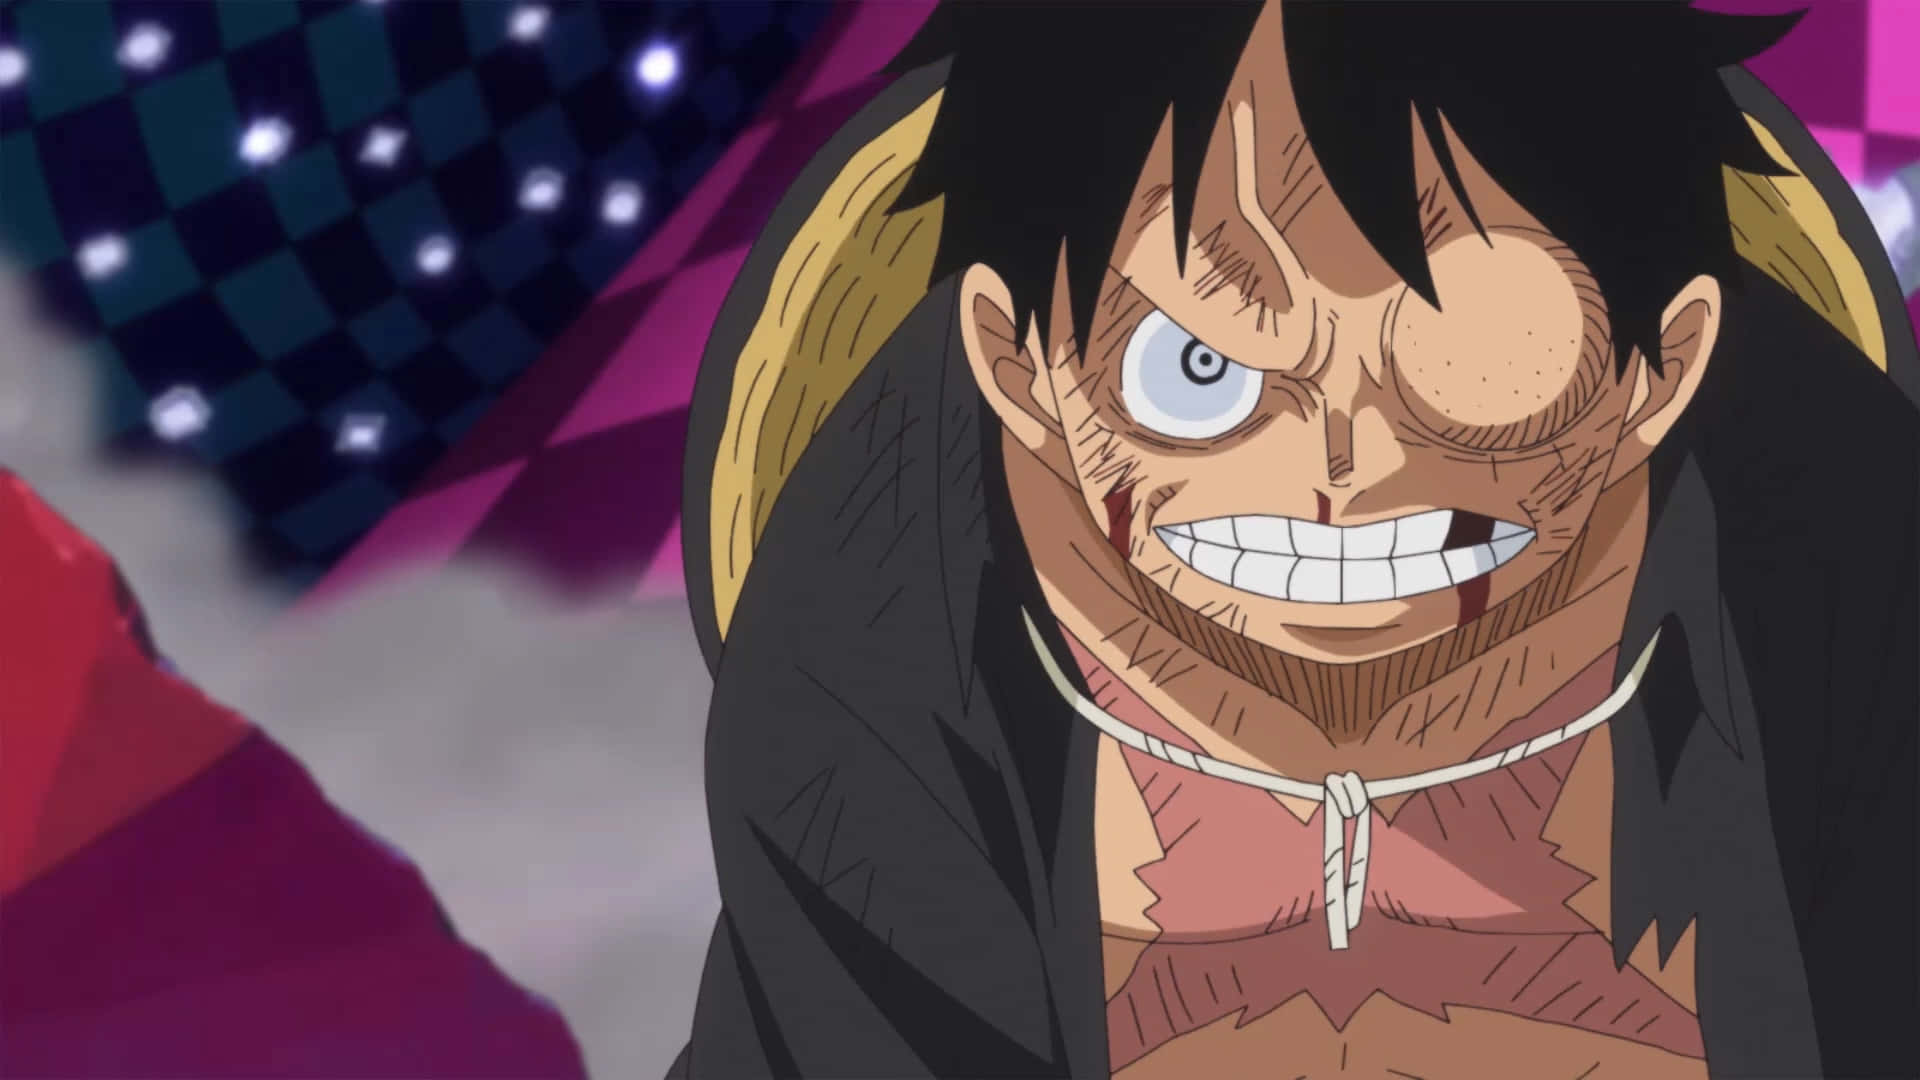 Join Straw Hat Luffy on his Pirate Adventure!